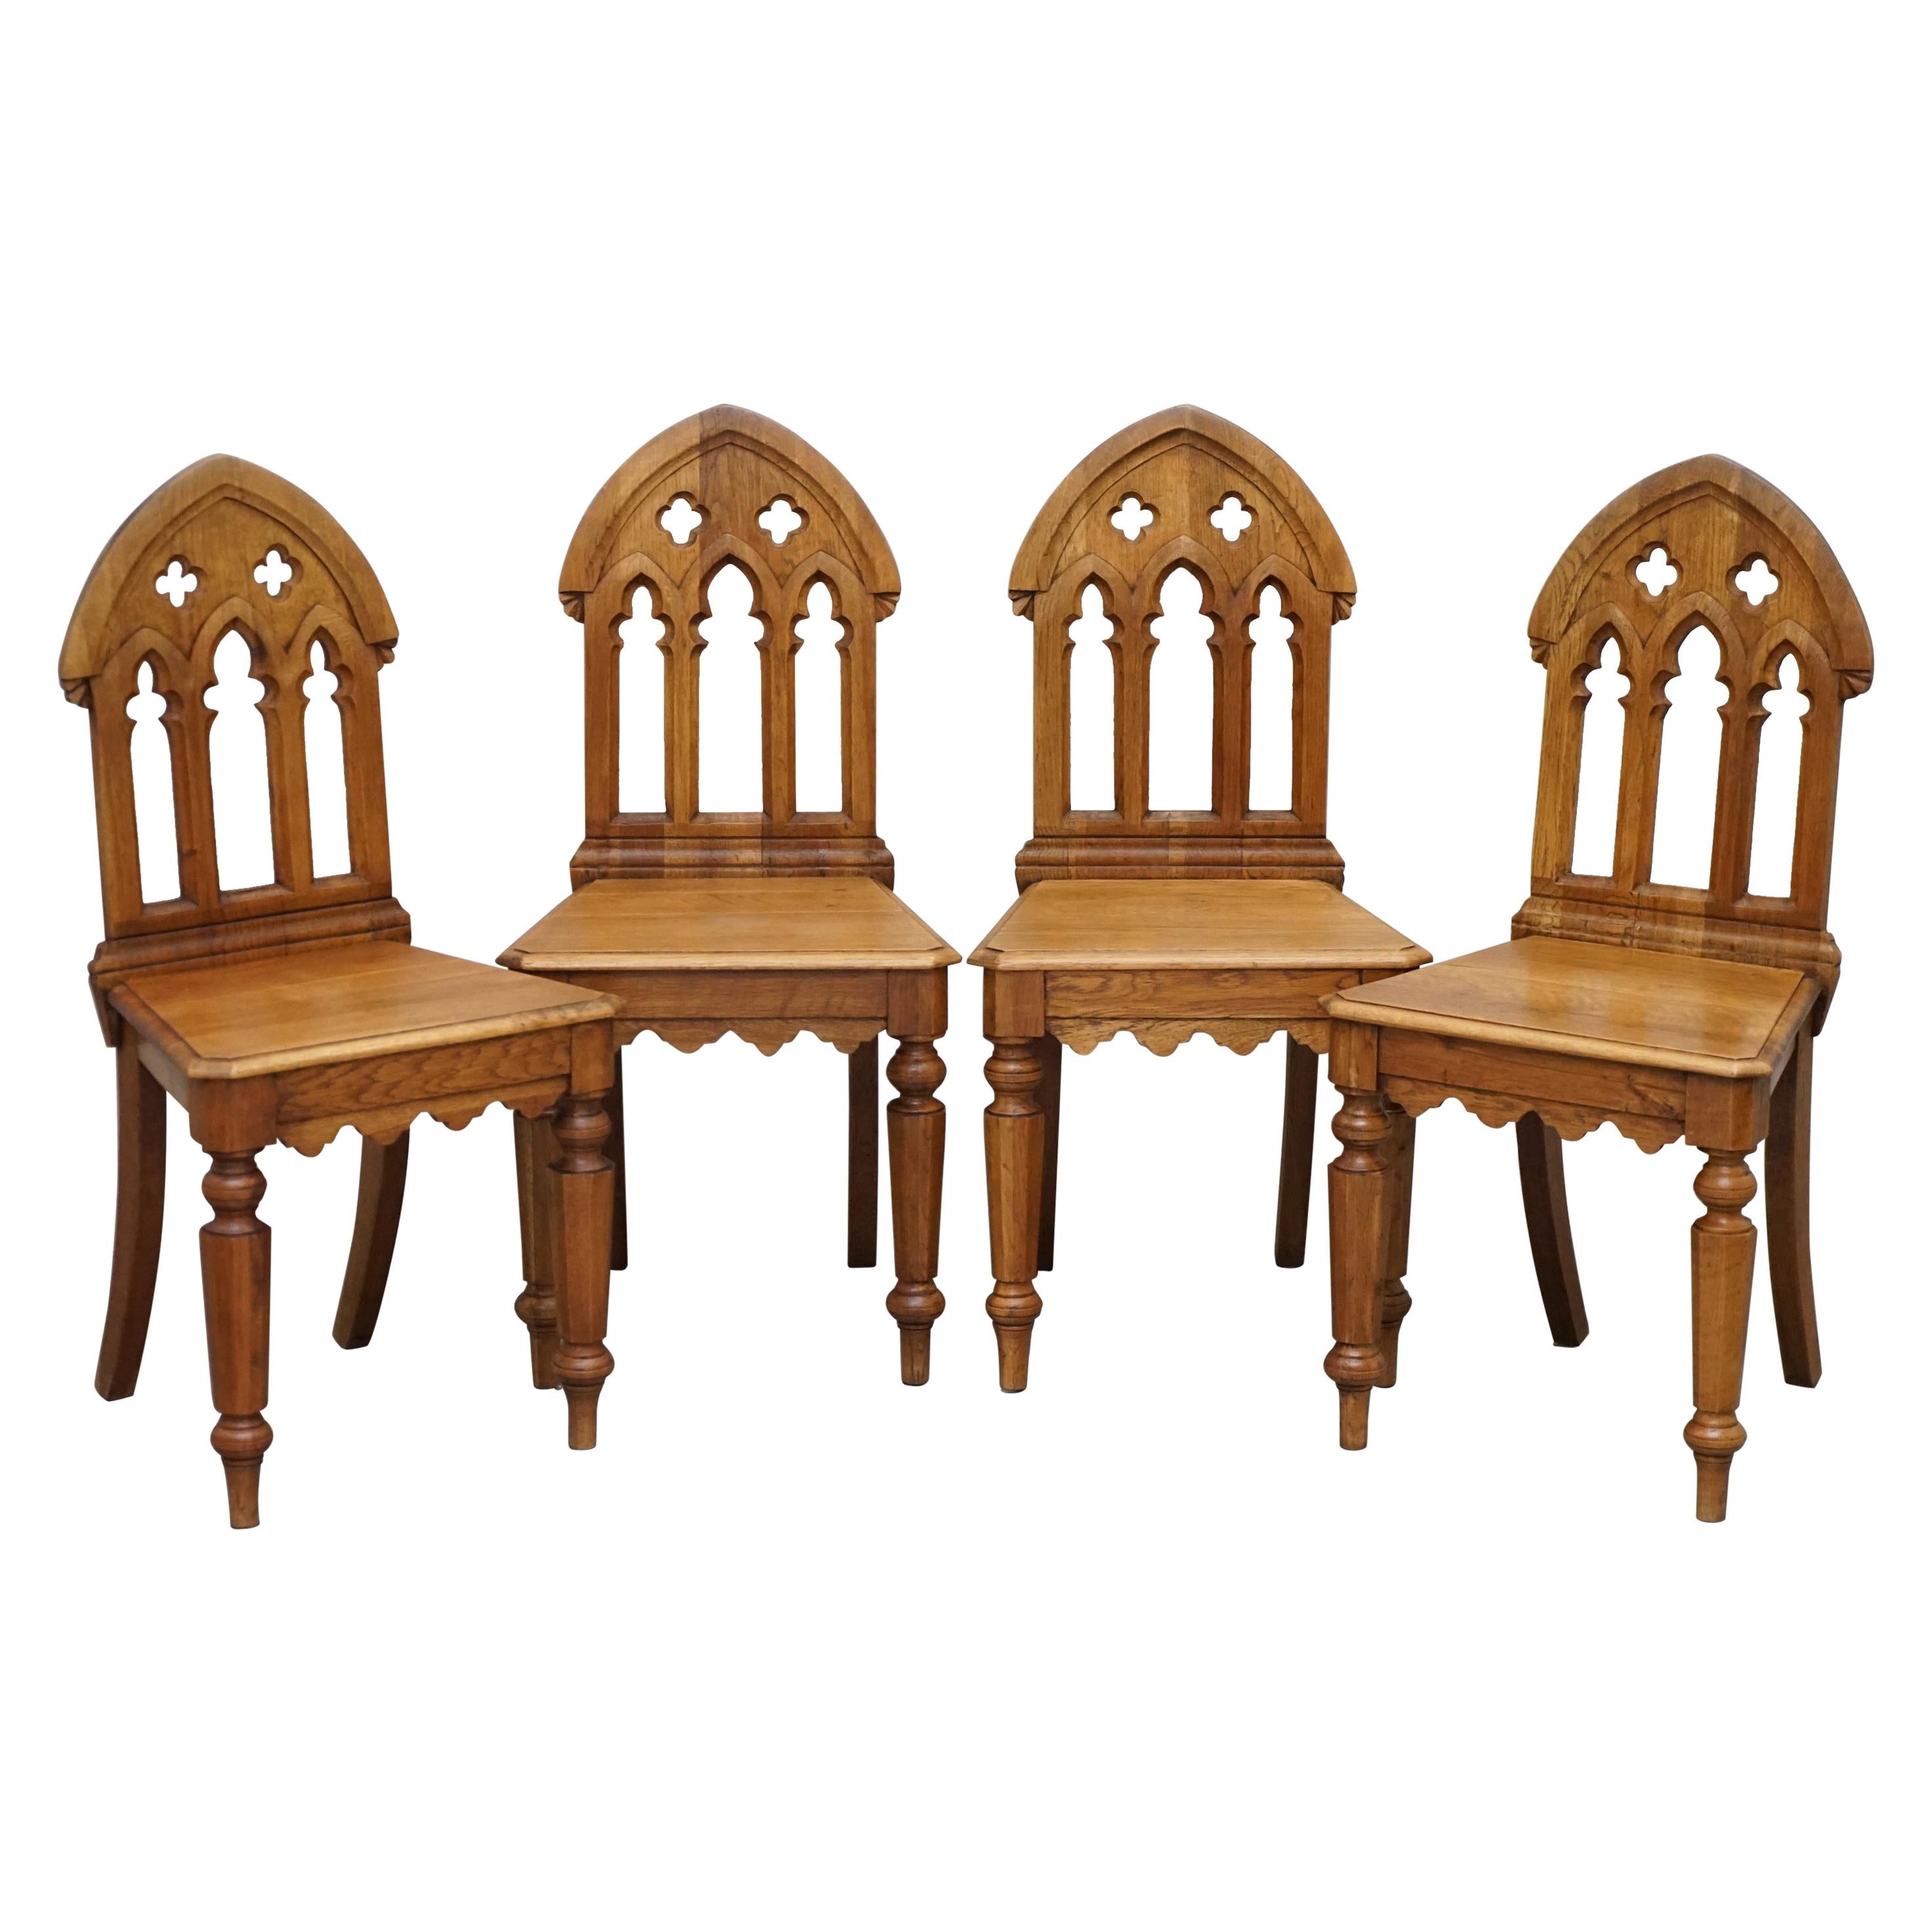 X4 Amazing Vintage Gothic Steeple Back Dining Chairs Lovely Pugin Style Carving For Sale